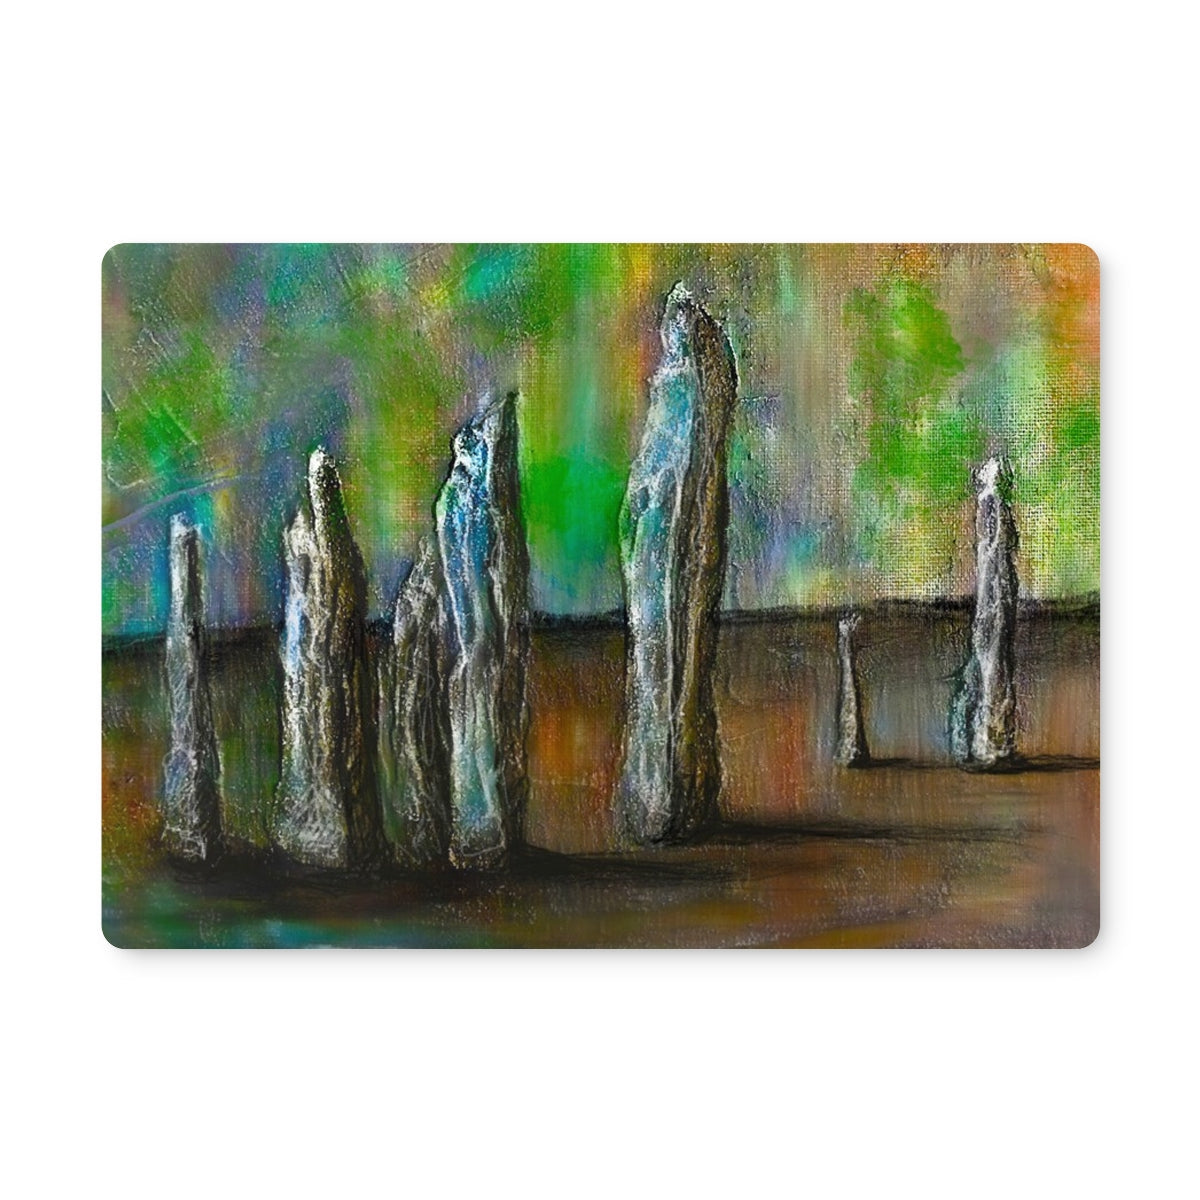 Callanish Northern Lights Art Gifts Placemat-Placemats-Hebridean Islands Art Gallery-4 Placemats-Paintings, Prints, Homeware, Art Gifts From Scotland By Scottish Artist Kevin Hunter